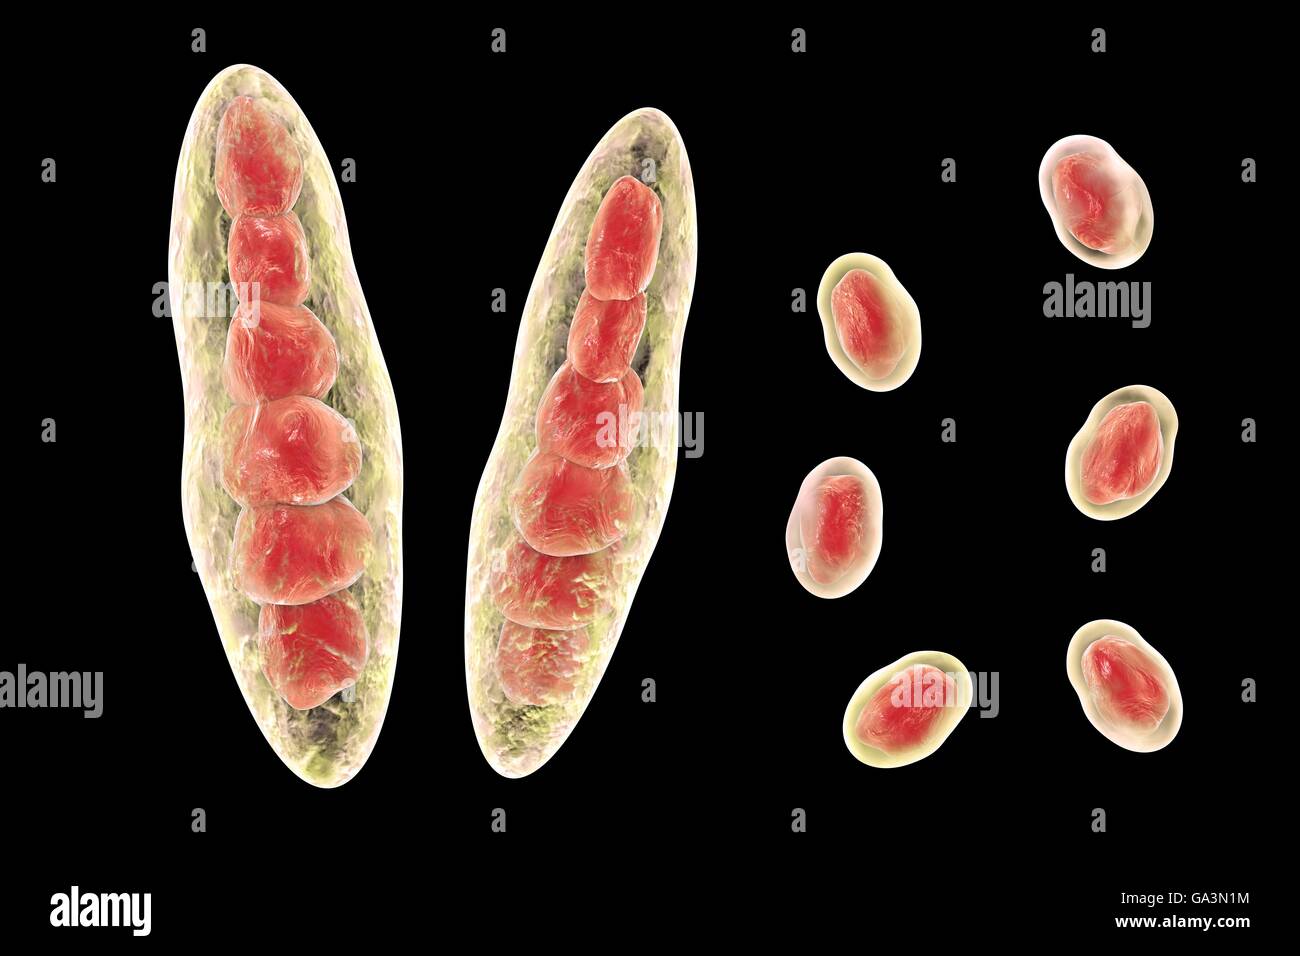 Computer illustration of Trichophyton mentagrophytes, the cause of athlete's foot (tinea pedis) and scalp ringworm (tinea capitus). Both of these contagious skin infections are spread by the fungus's spores (red). T. mentagrophytes is one of many species of fungi that can grow in human skin, causing inflammation and itching. Athlete's foot and ringworm are treated with antifungal drugs. Seen here are two types of conidia (structures which contain fungal spores): macro-conidia (multicellular bodies) and micro-conidia (unicellular bodies). Stock Photo